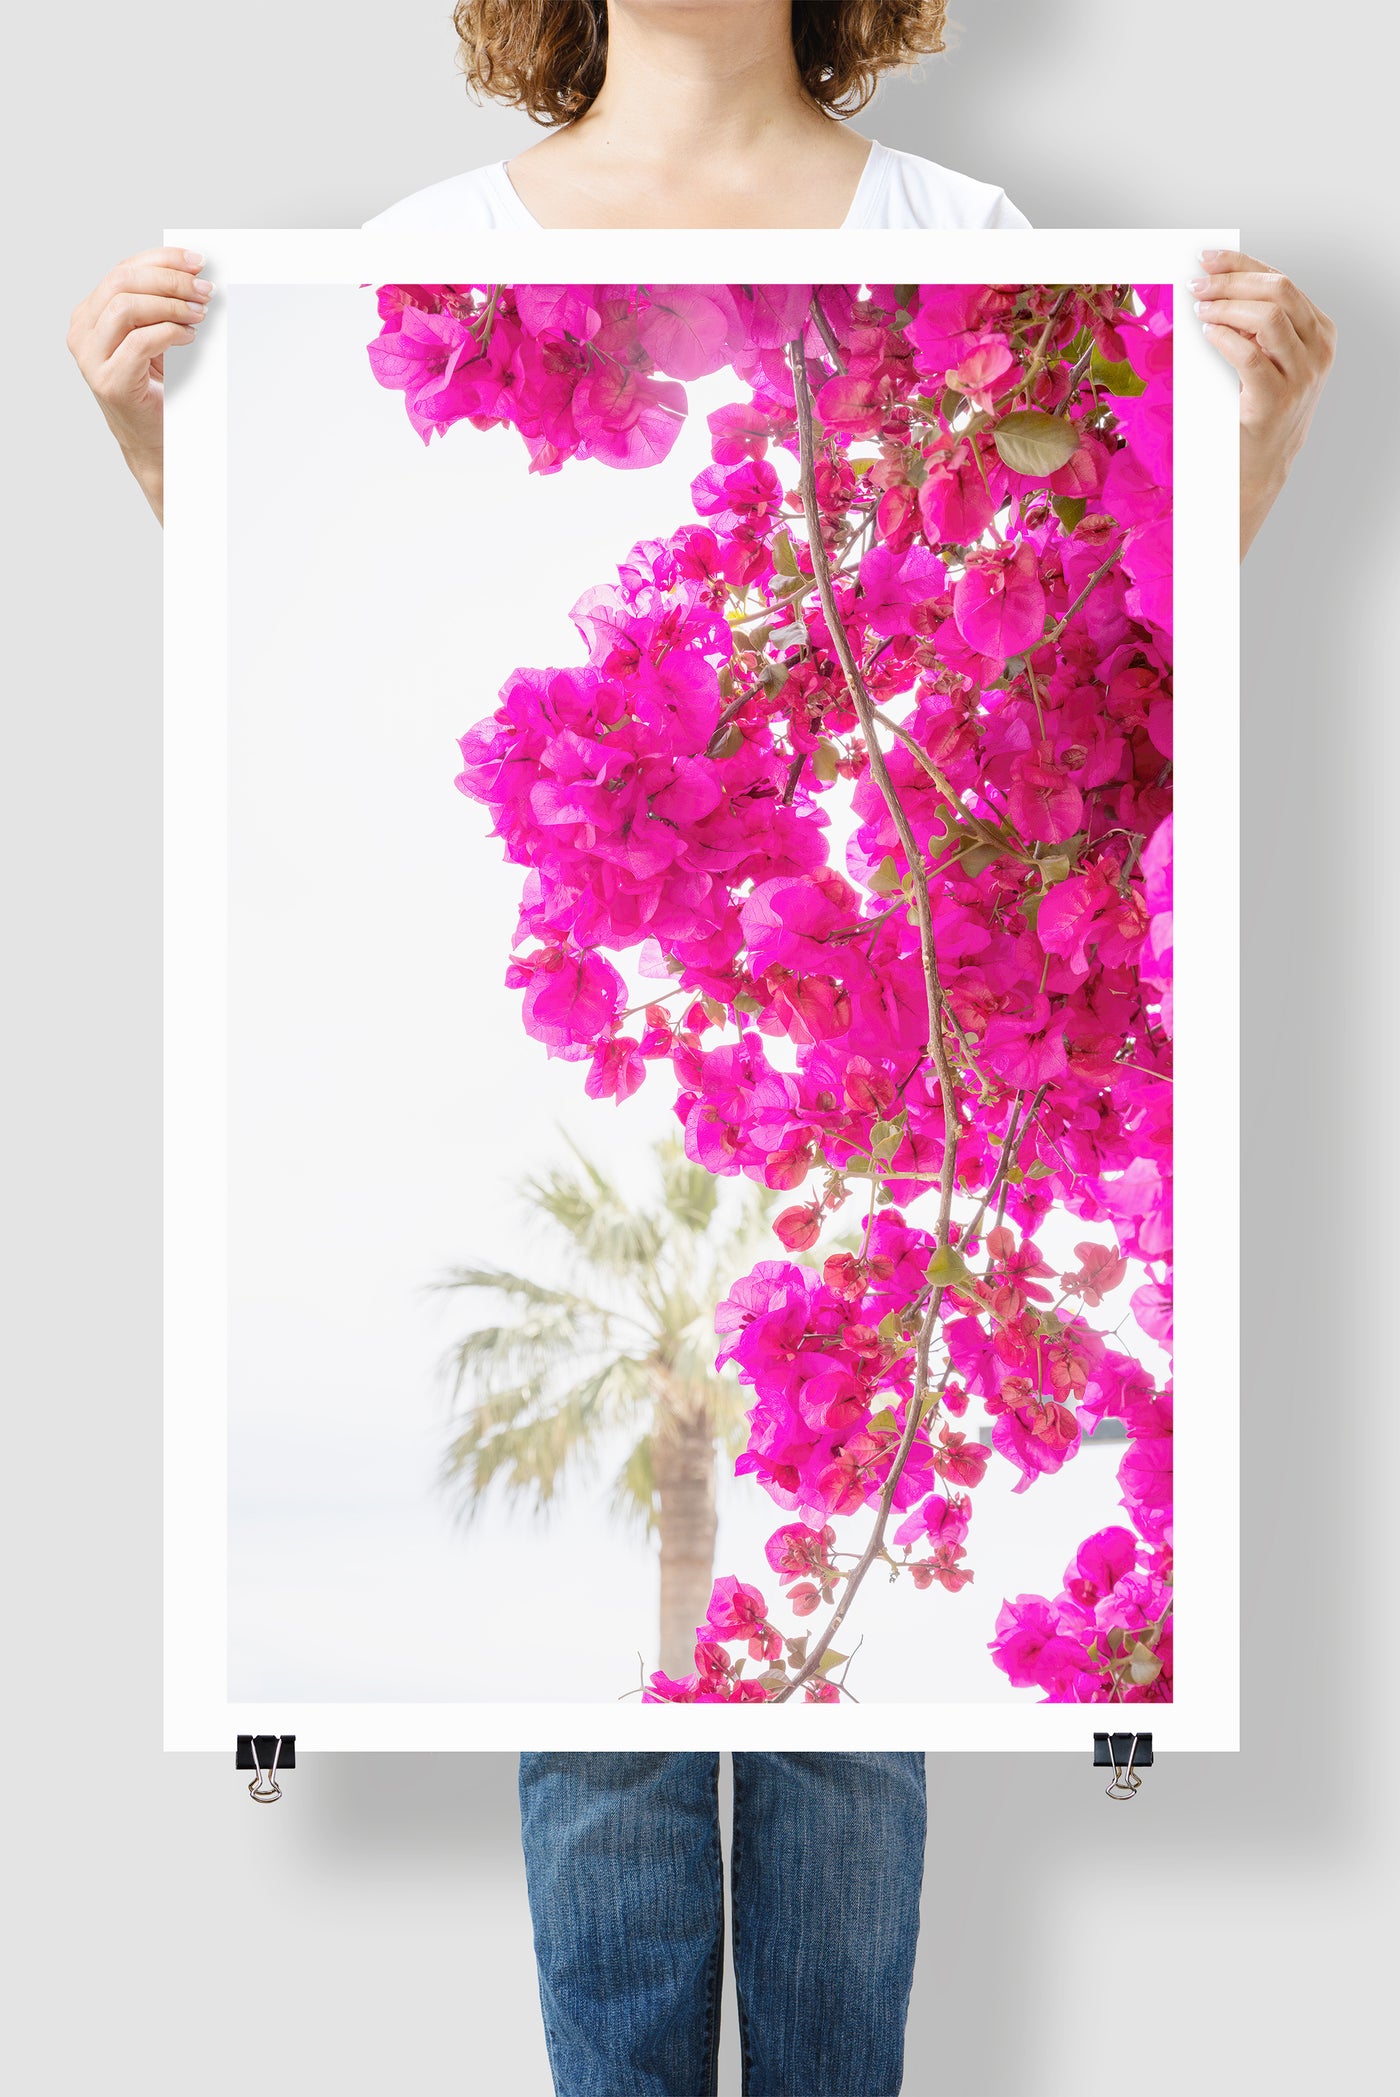 Bougainvillea and Palm Tree - Art print by Cattie Coyle Photography